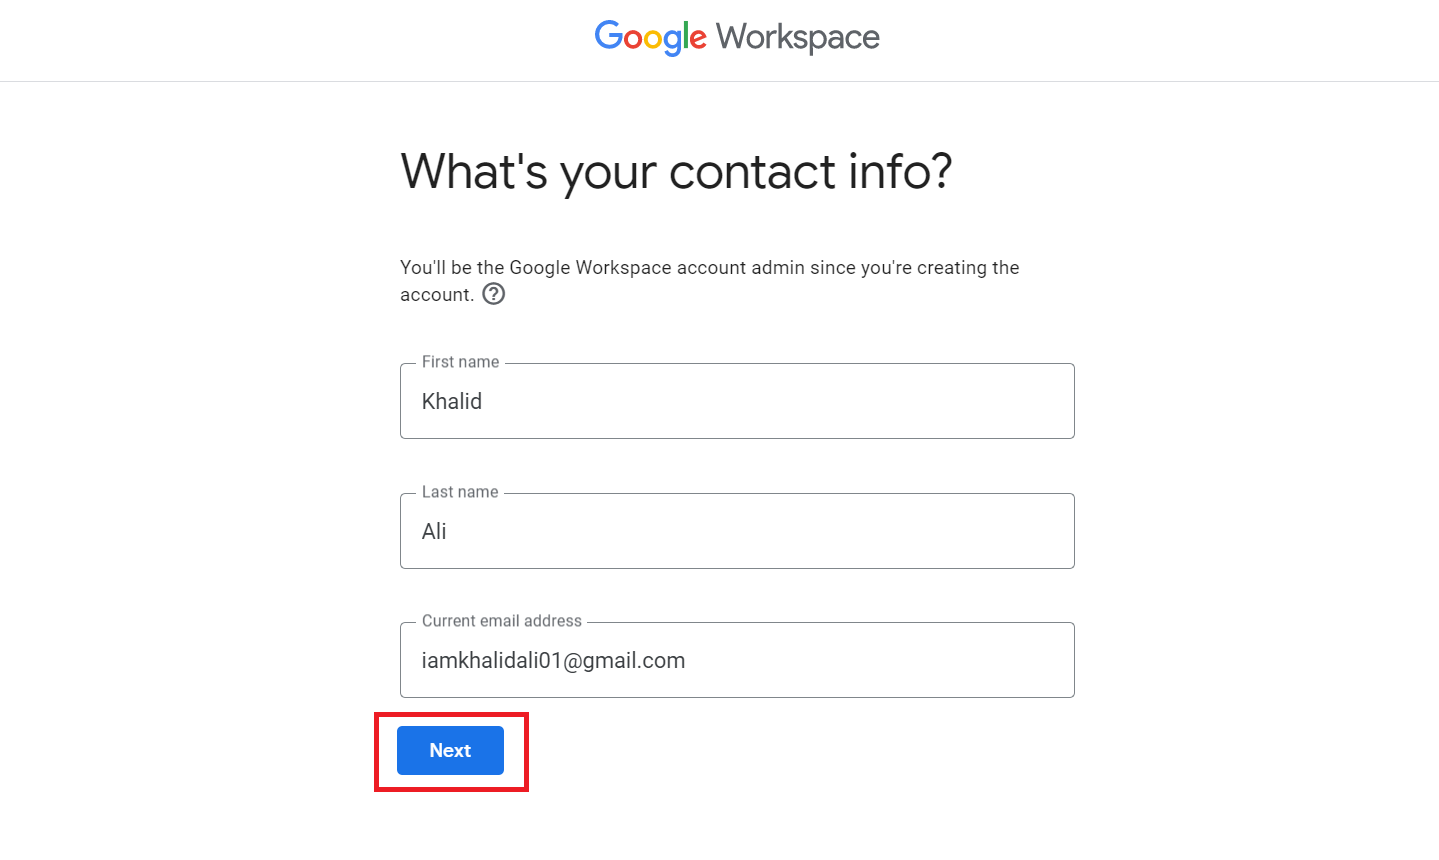 Enter your name and existing Gmail account